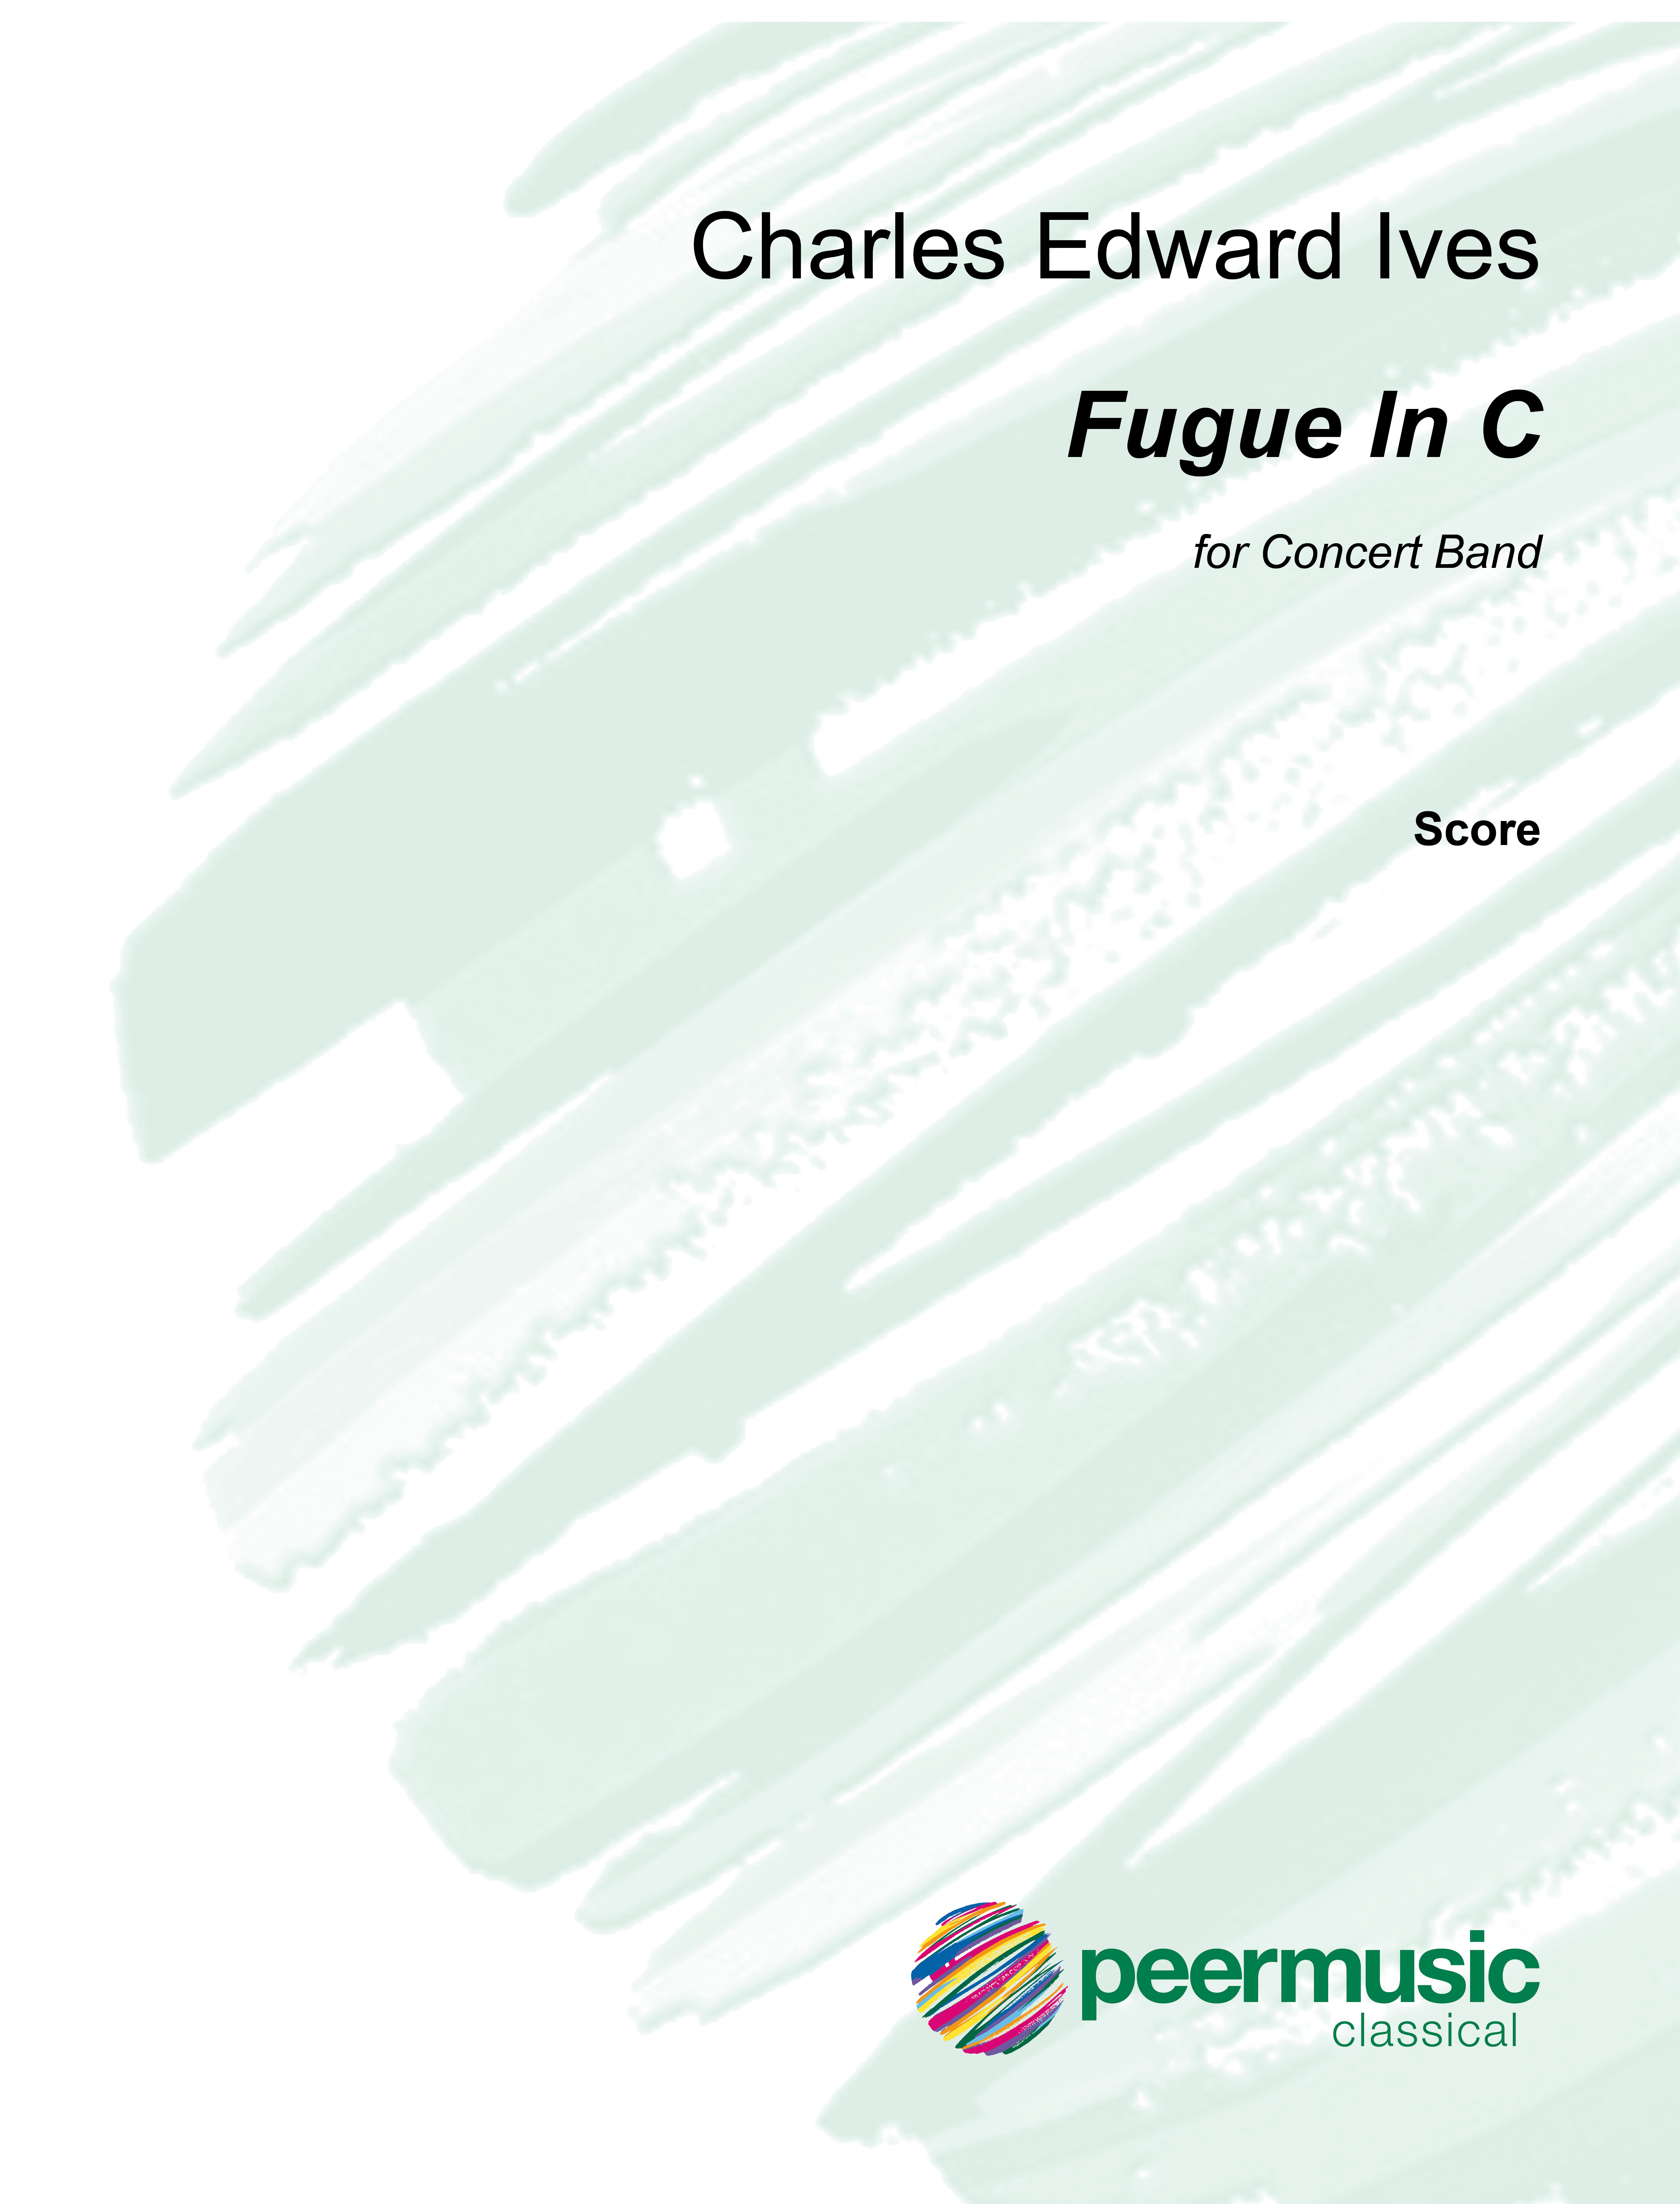 Fugue in C  for concert band  score